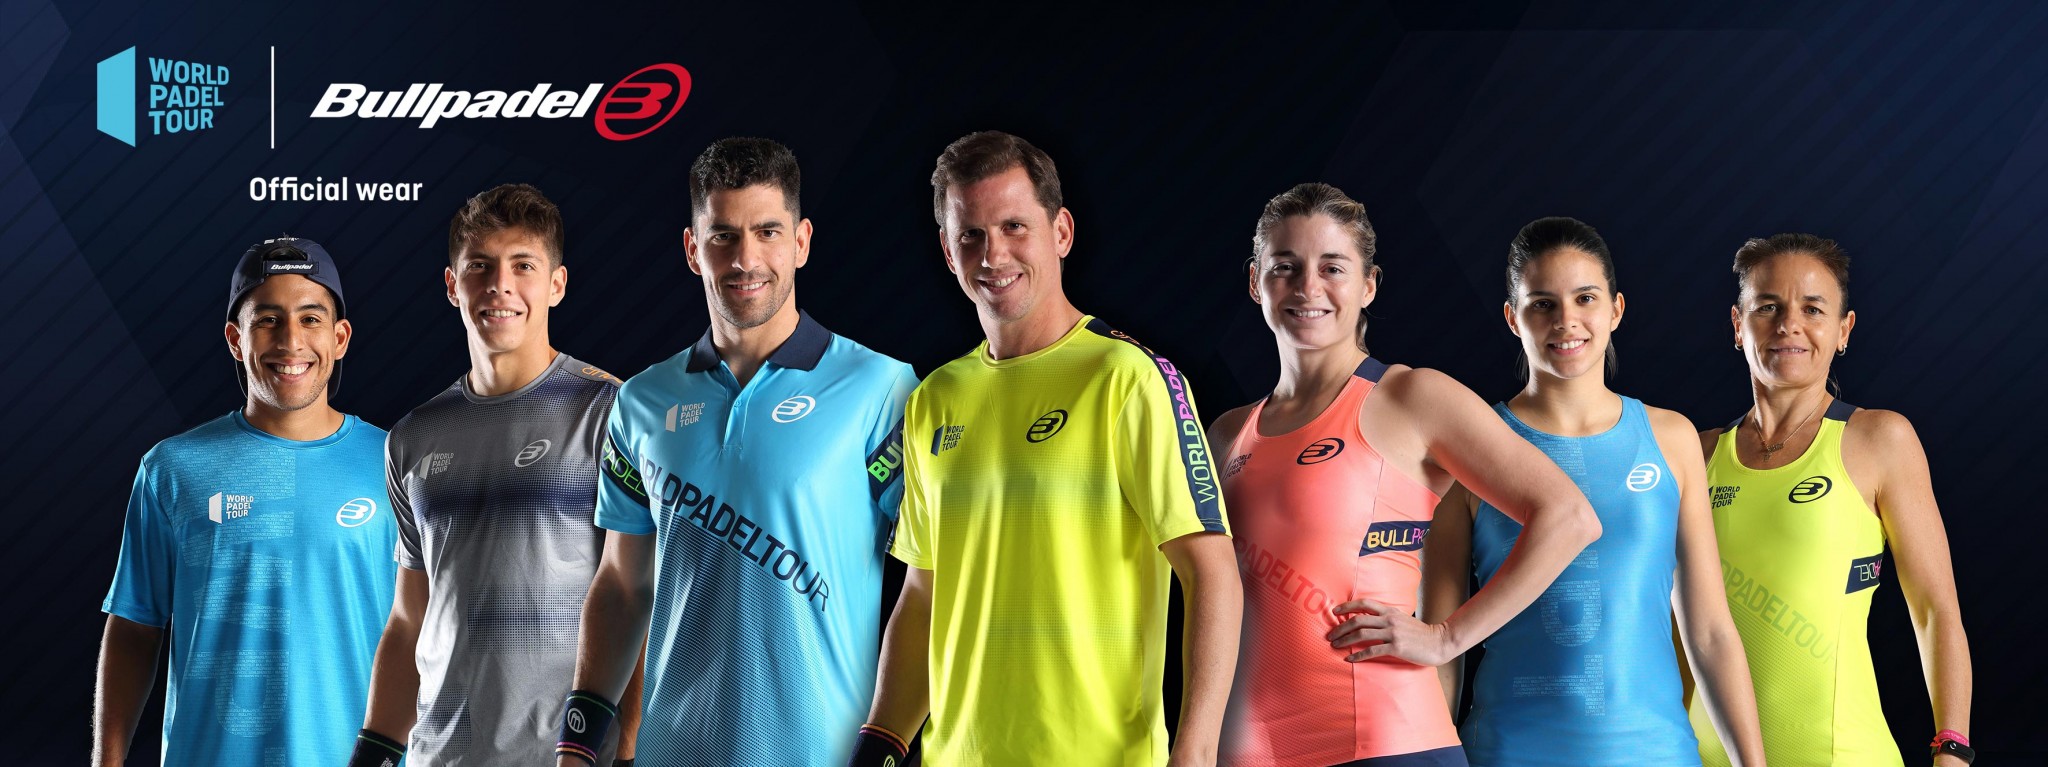 Bullpadel 2020: The players present the palas to you